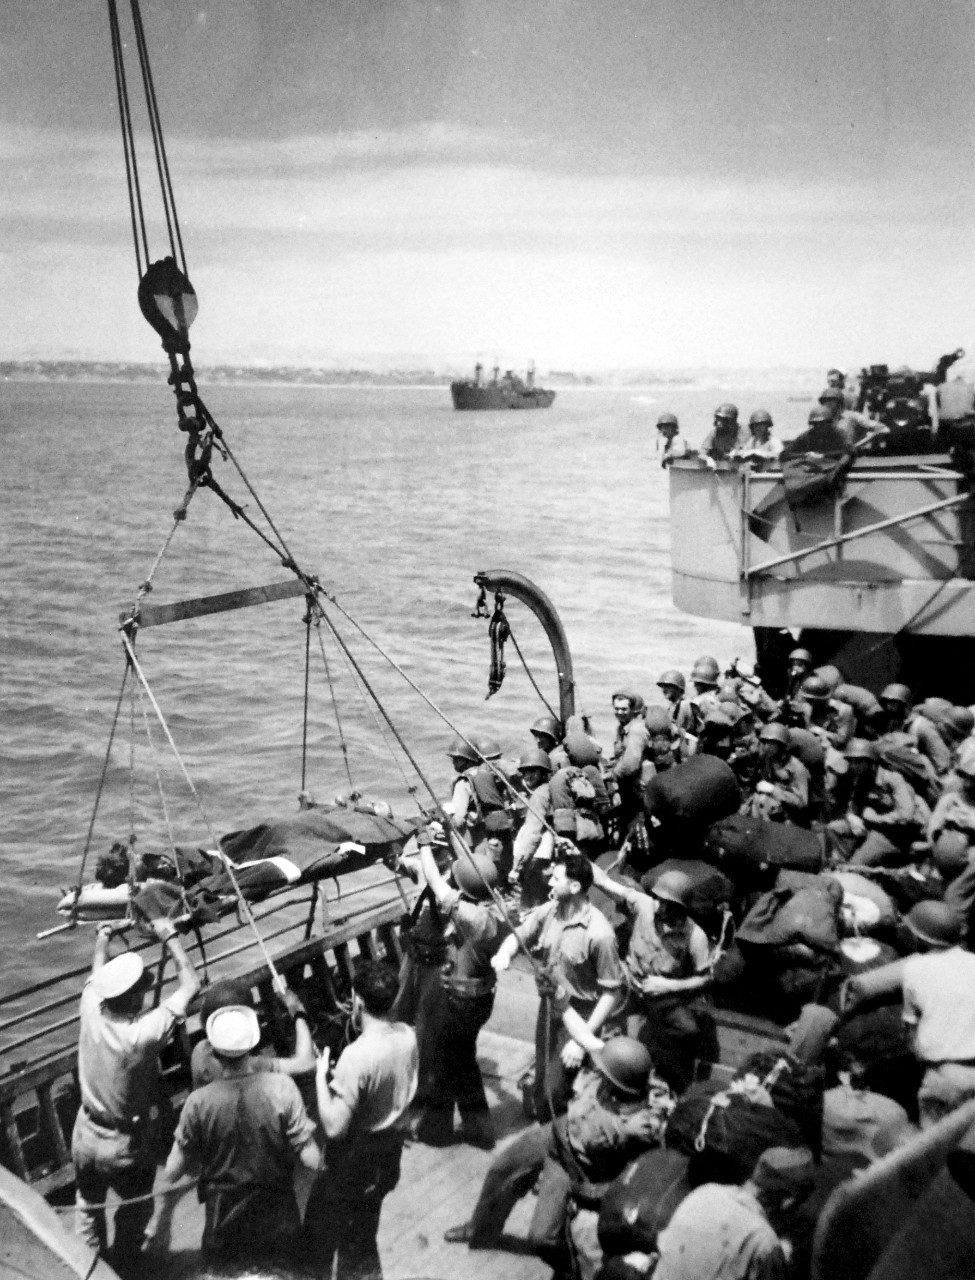 26-G-1796:  Operation Husky - Invasion of Sicily, July – August 1943.    While wounded are brought back to a U.S. Coast Guard manned transport, other soldiers aboard the ship are ready to take their turn to join the invaders of Sicily.   U.S. Coast Guard Photograph.  Photographed through Mylar sleeve.  Courtesy of the Library of Congress:   Lot-805-9. (2015/10/30).